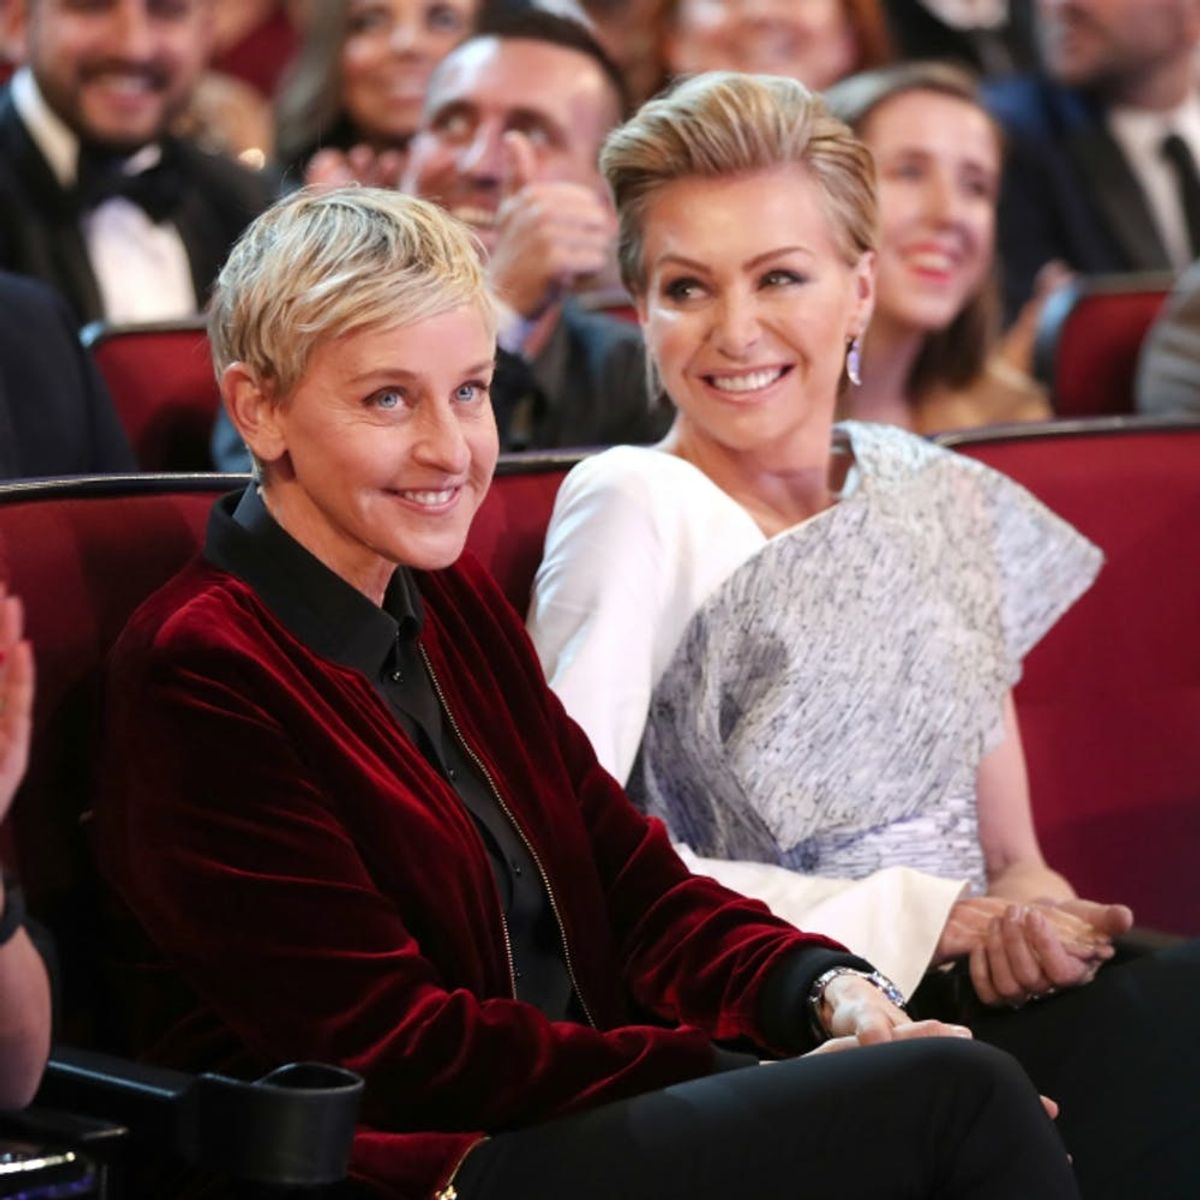 Here’s How Wine Caused Ellen to Dislocate Her Finger While Partying With Her Wife